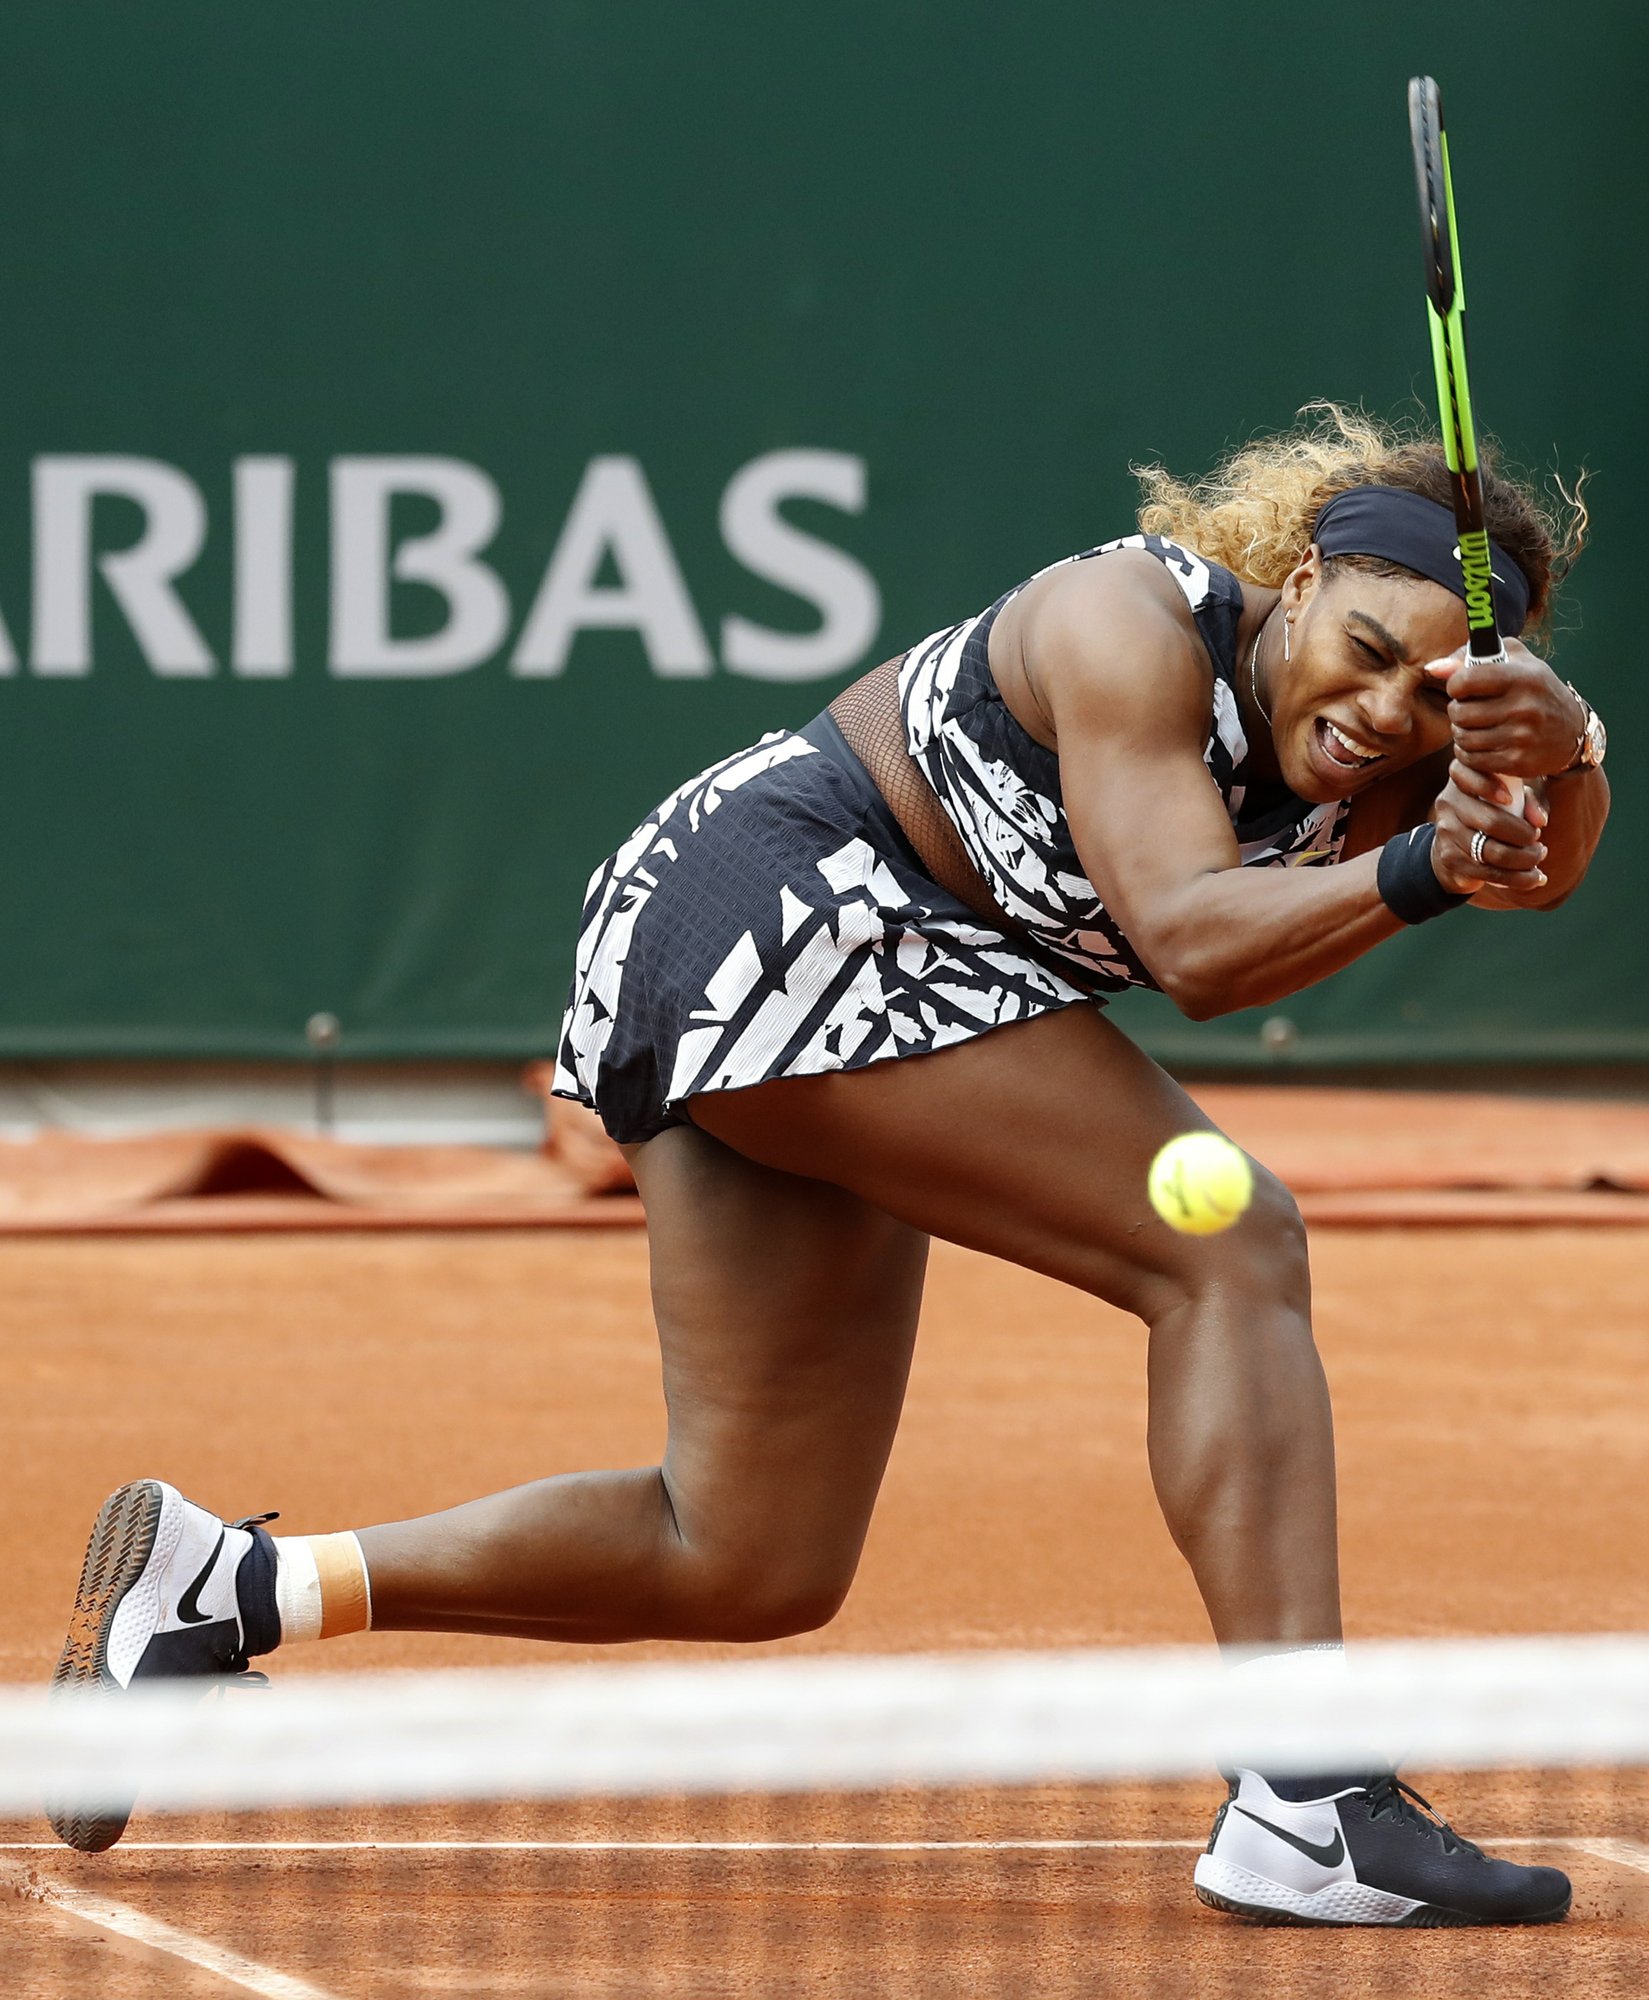 Champion, queen, goddess, mother: Serena wins at French Open